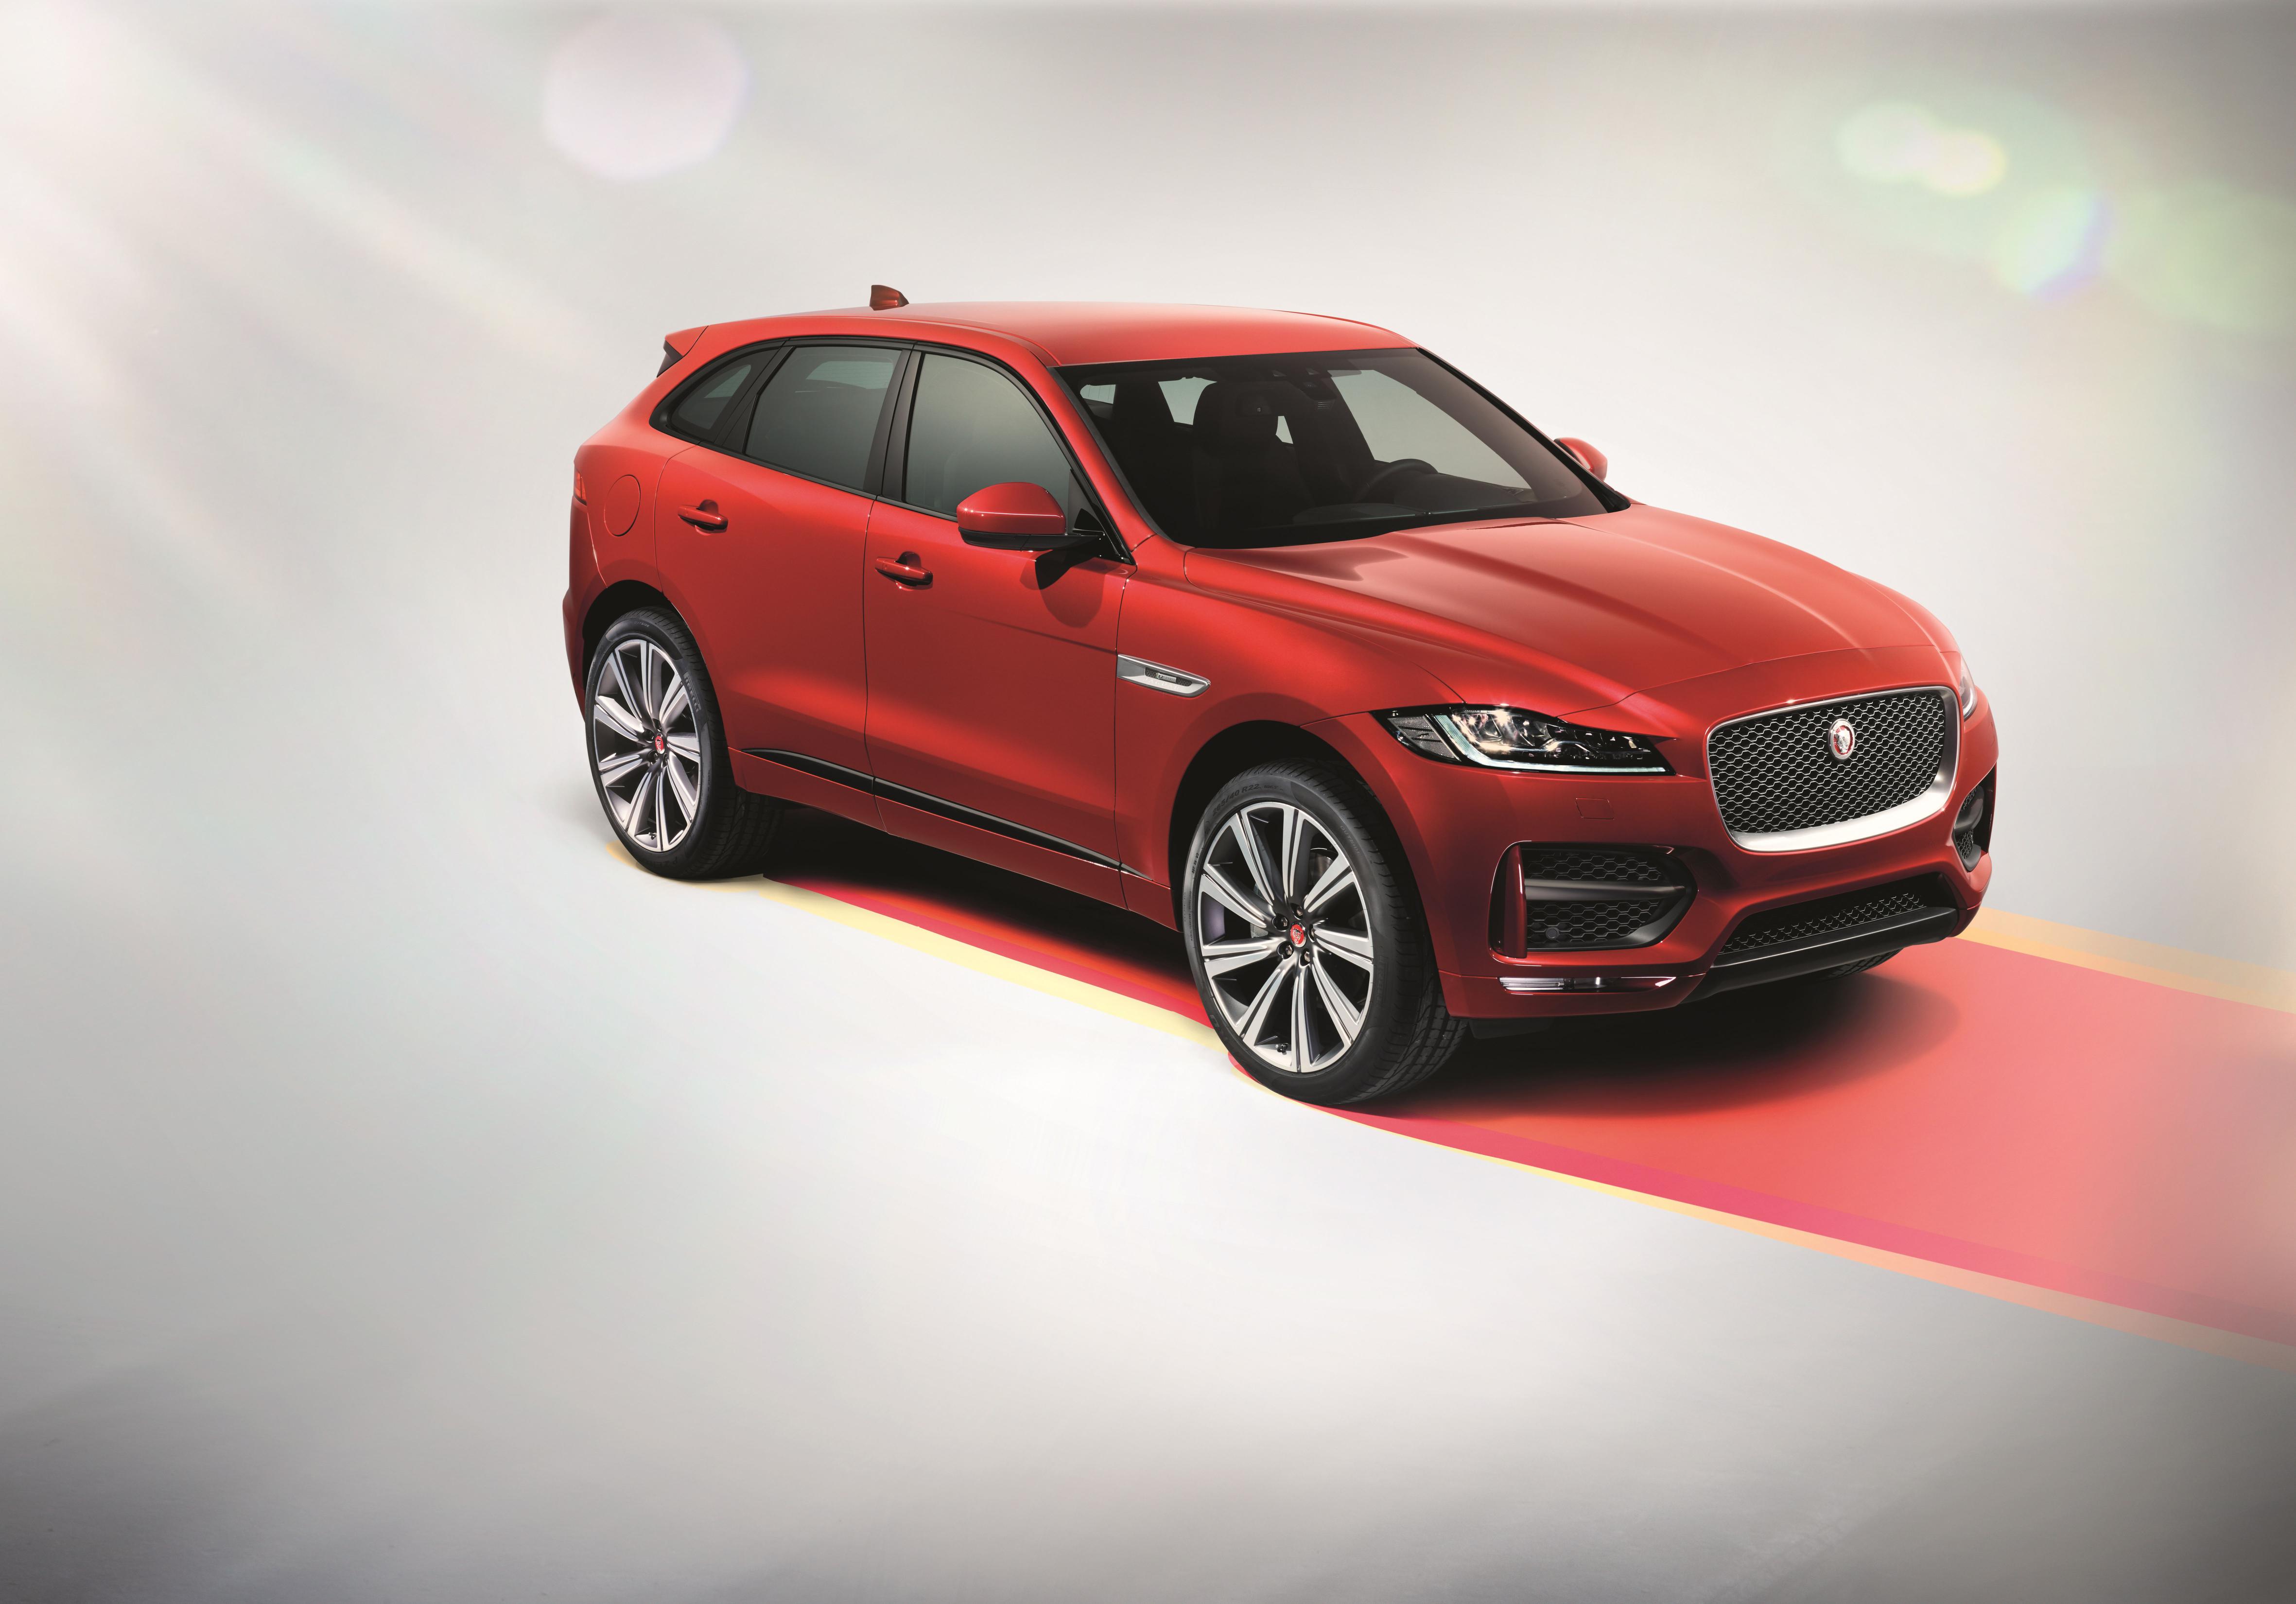 The all-new Jaguar F-PACE at IAA 2015